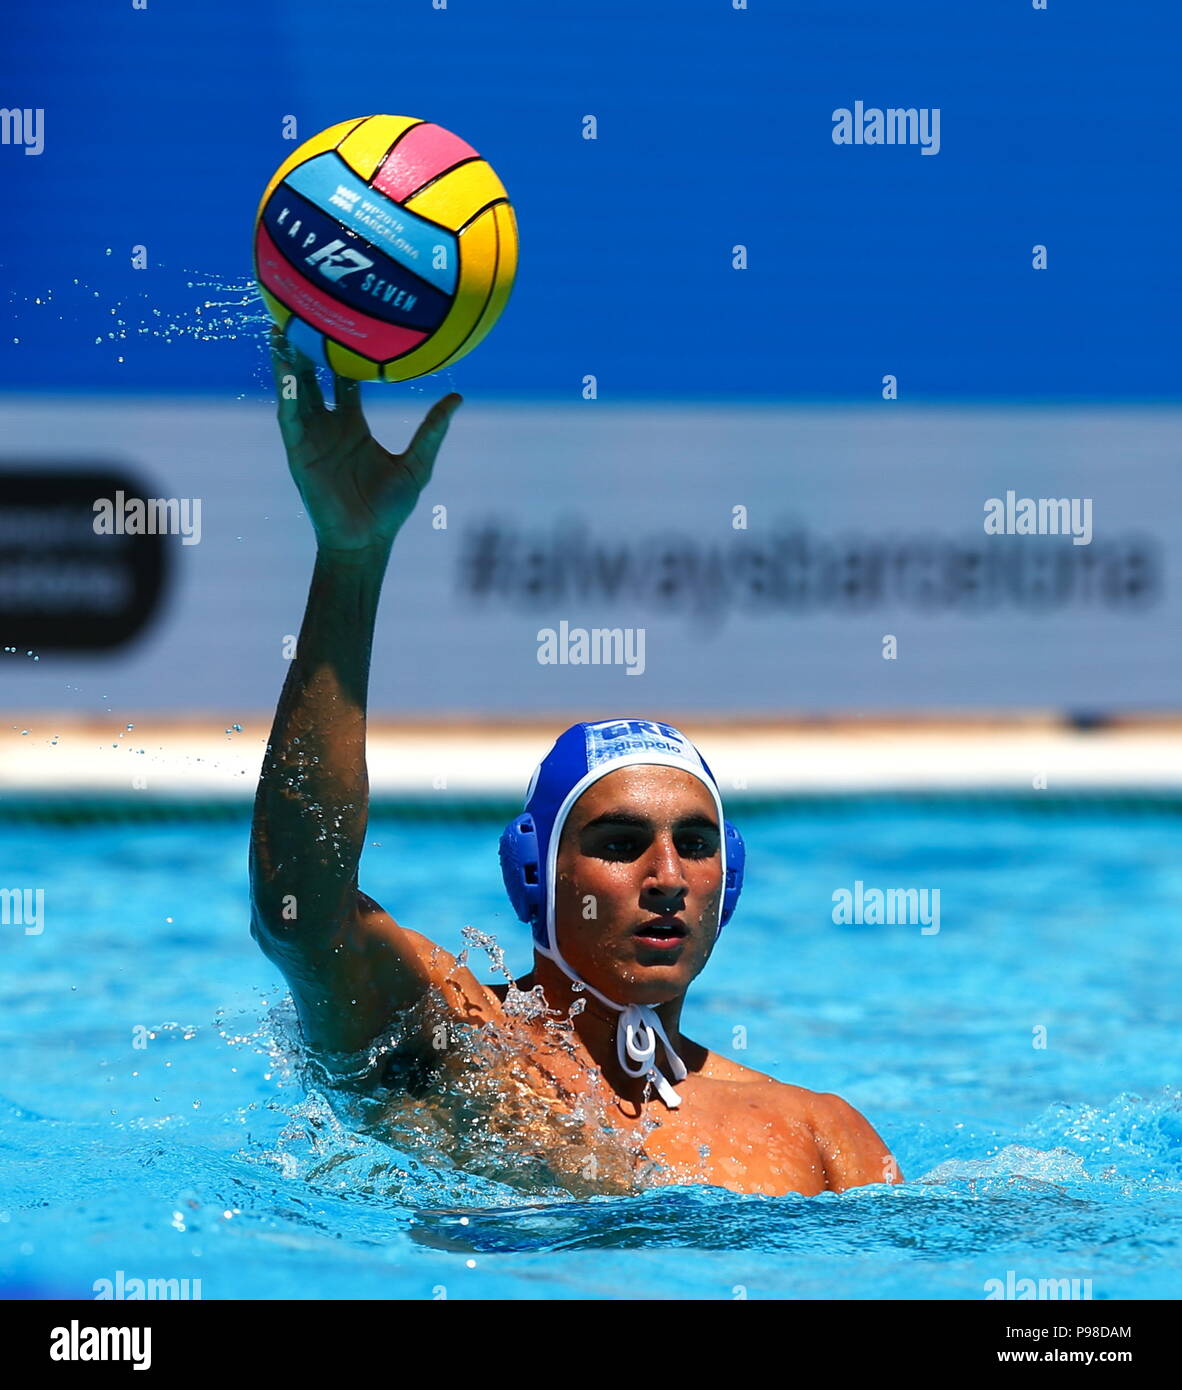 Barcelona, Spain. 16th July, 2018. Stylianos Argyropoulos Kanakakis in  action during game between Turkey versus Greece LEN European Water Polo  Championships, Barcelona 16.07.2018 Credit: Joma/Alamy Live News Stock  Photo - Alamy